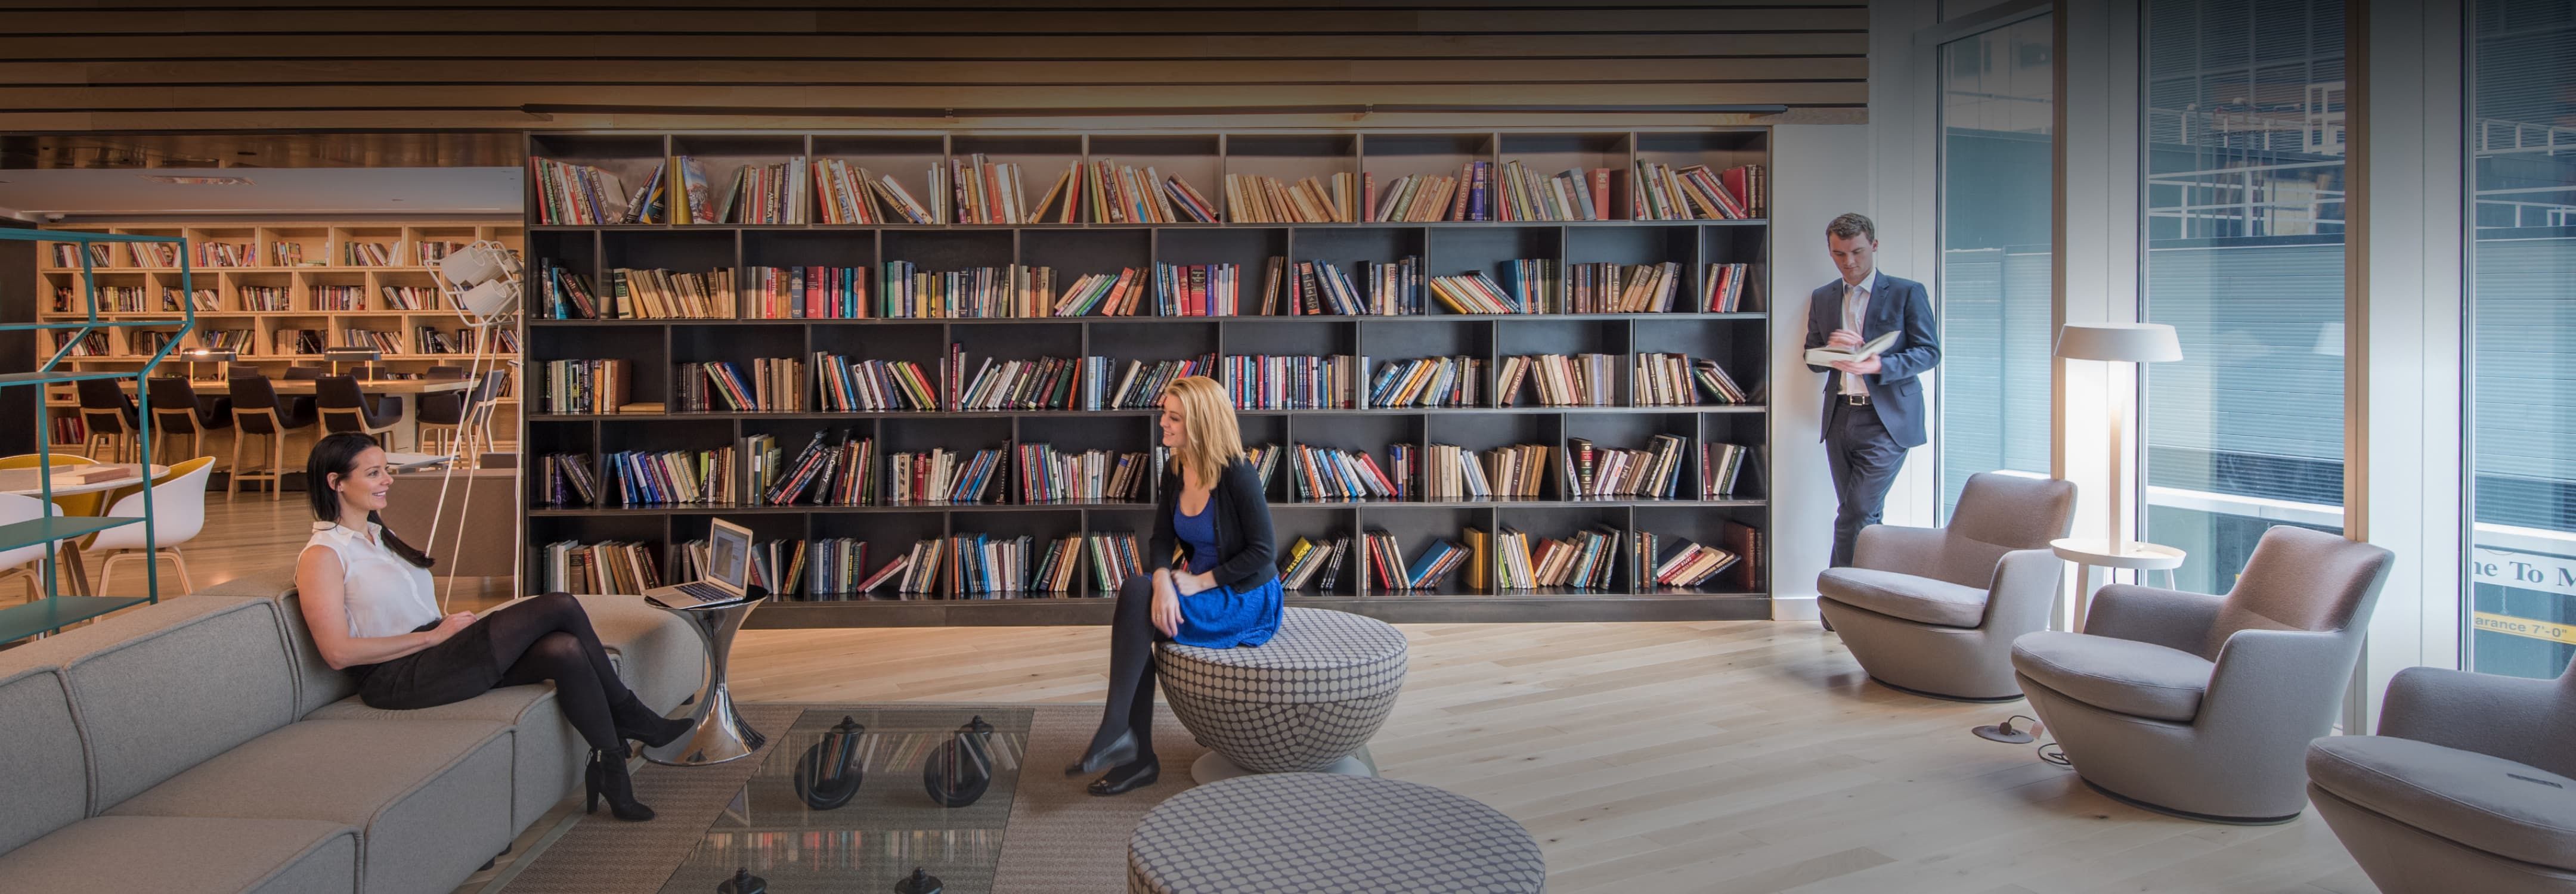 Modern library space with patrons, large bookshelves, comfortable seating, and large windows.